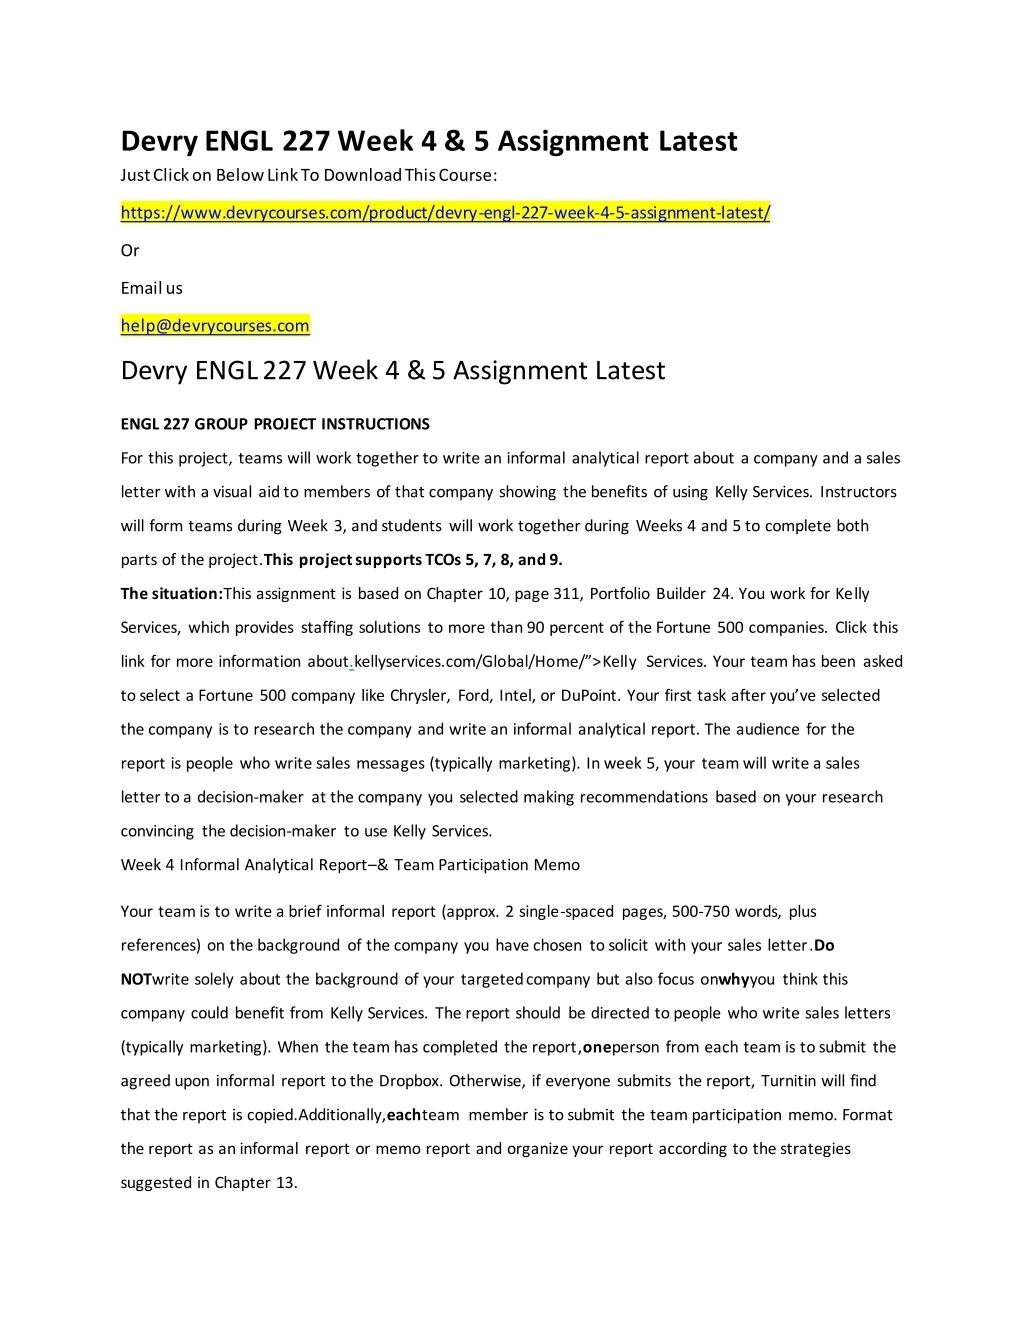 devry engl 227 week 4 5 assignment latest just